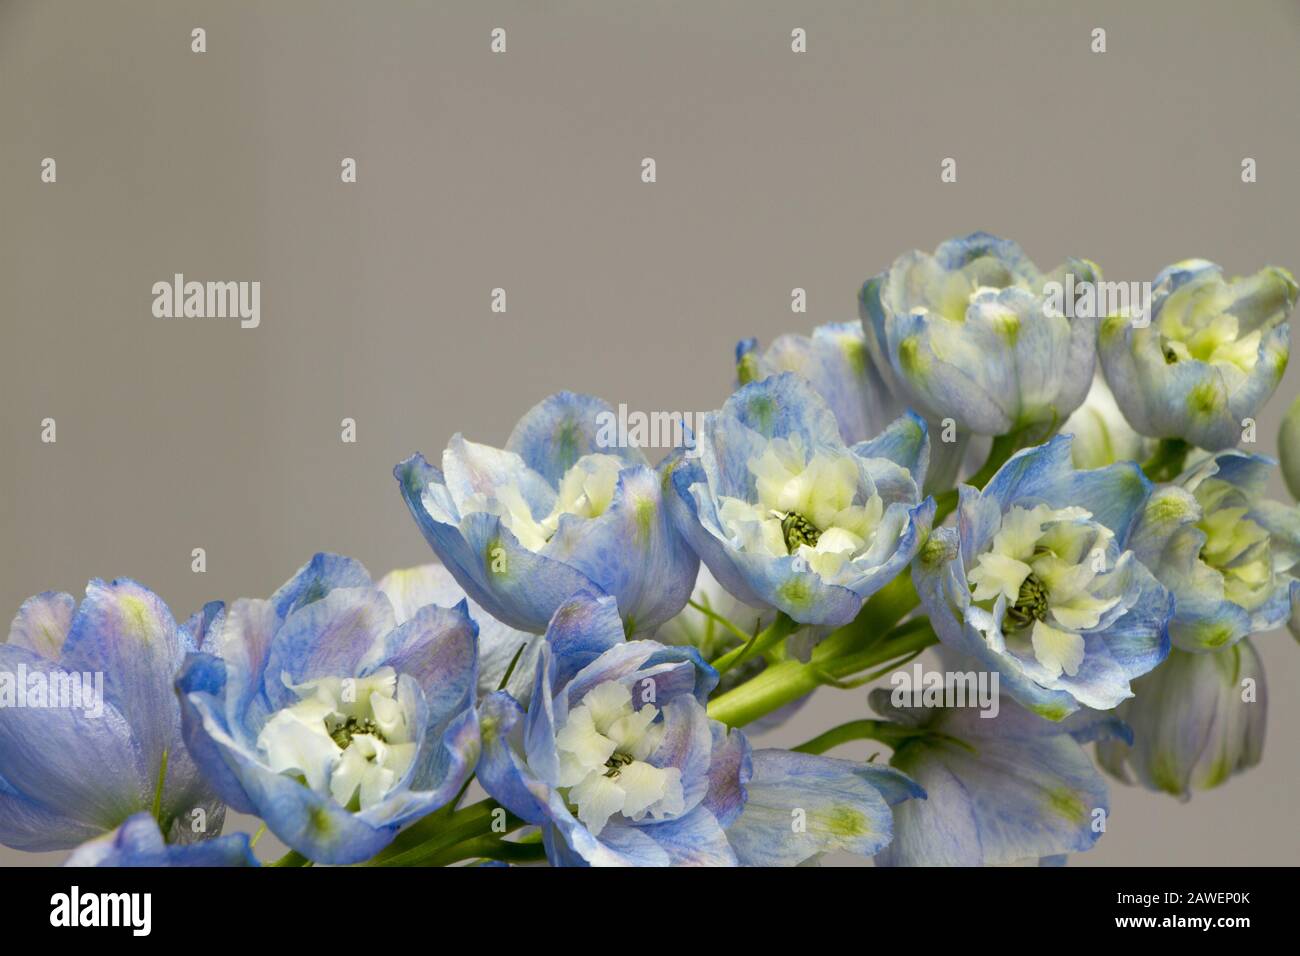 Close-up of a blooming white-blue delphinium against a light gray wall, greeting or festive concept Stock Photo